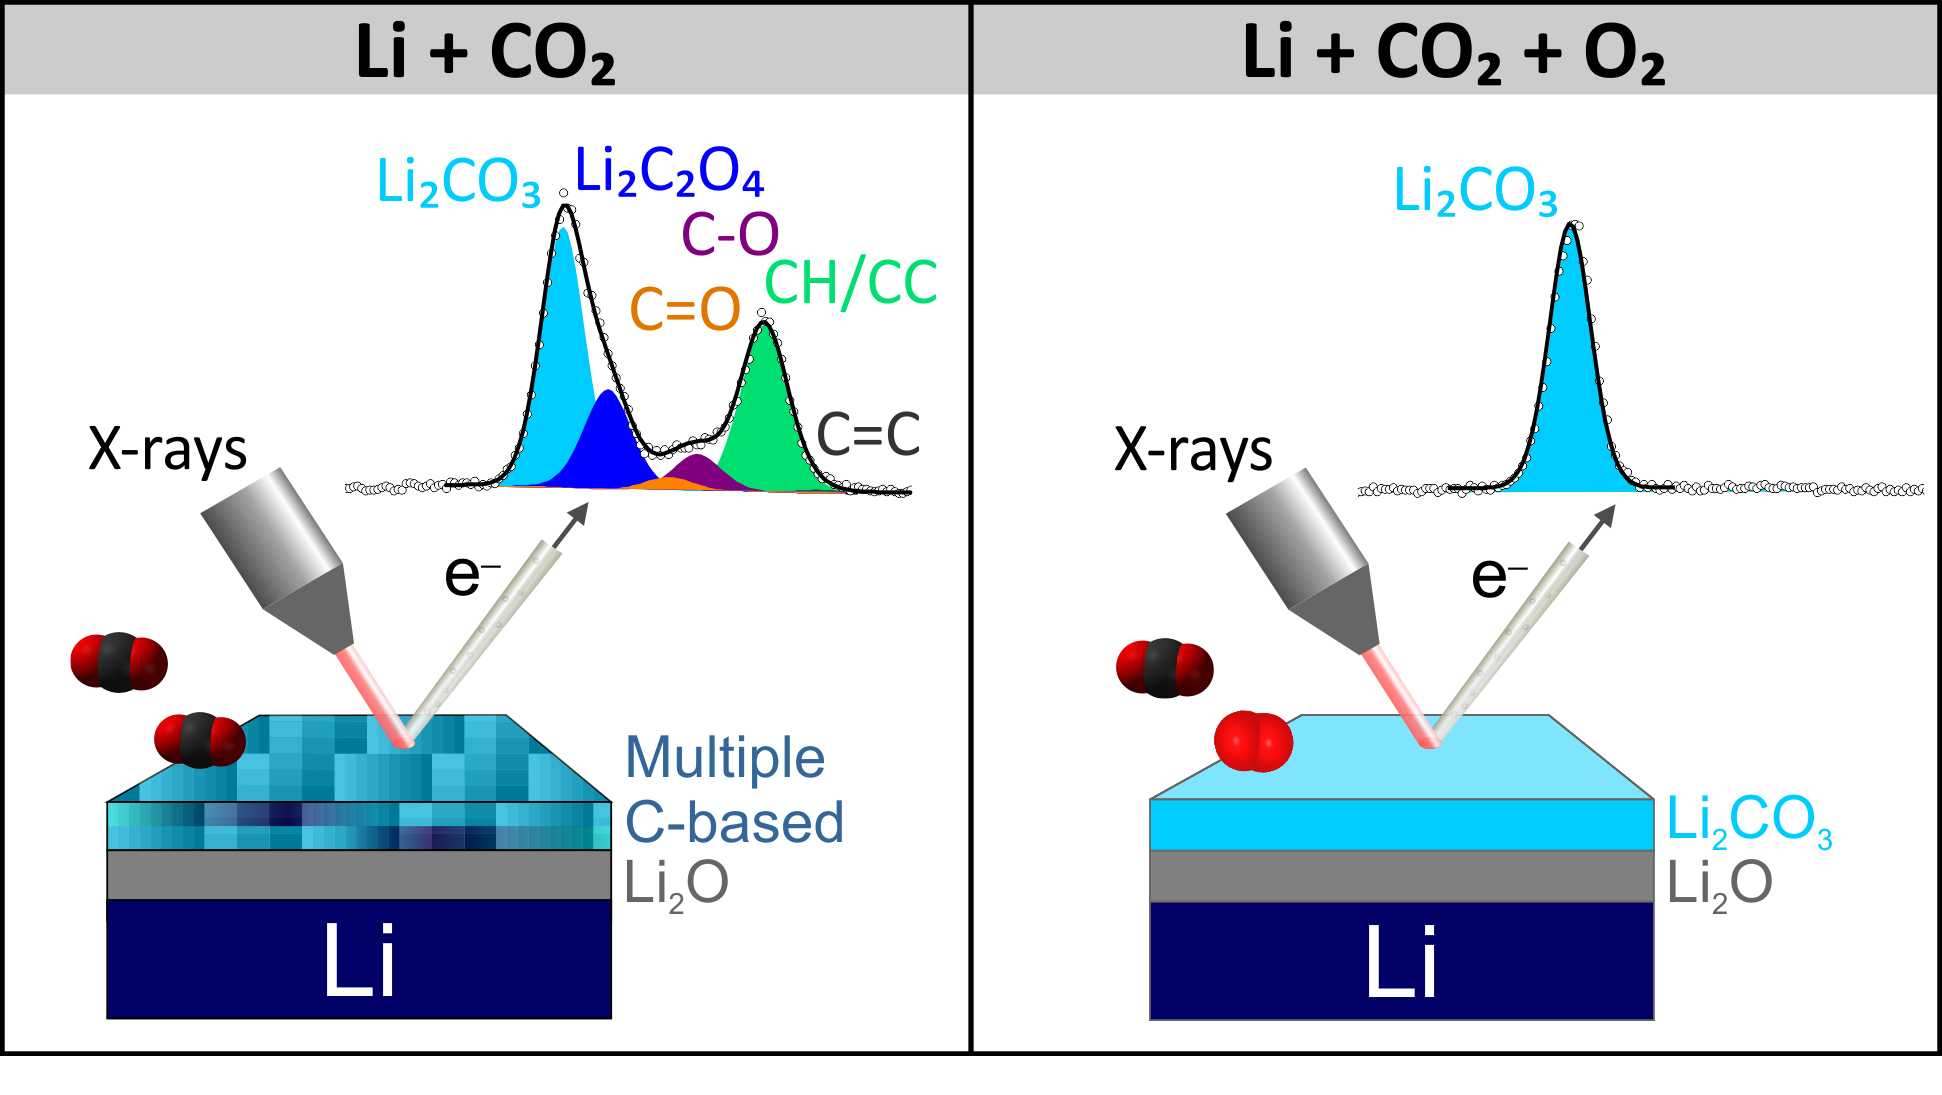 Comparison of the effect of adding O2 gas to the environment.